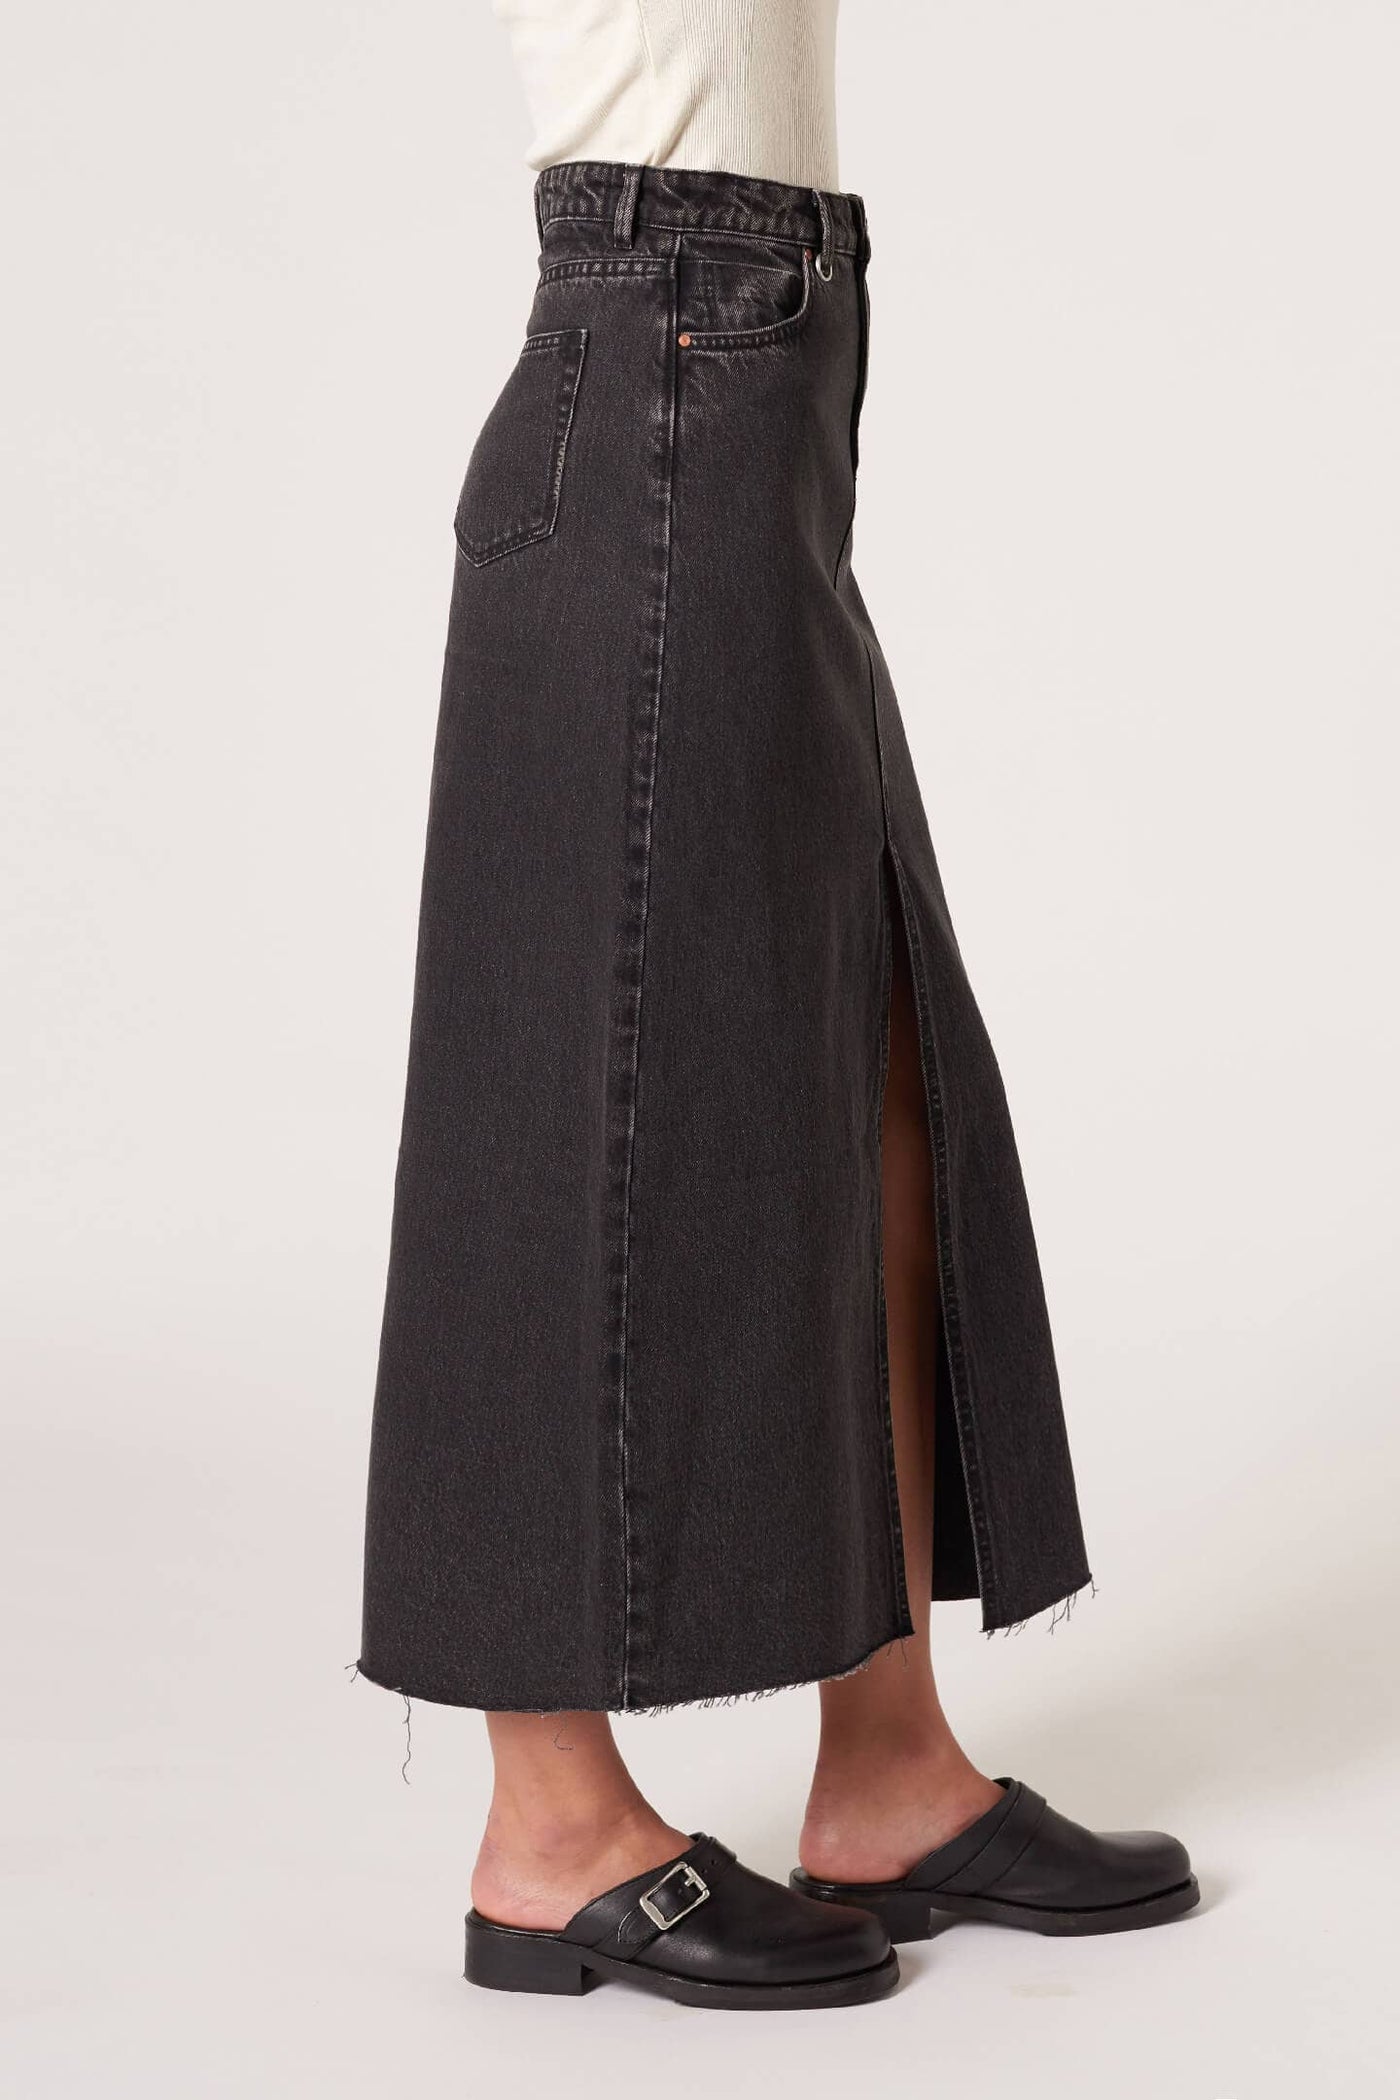 The Neuw Darcy skirt is our new favourite denim piece. This trans-seasonal style will take you from one season to the next. Team with a tank or tee in summer or with a blazer and sneakers for a winter fit.  Classic high waist denim skirt Centre front hem split Raw hem Length 100cm 100% Australia Cotton